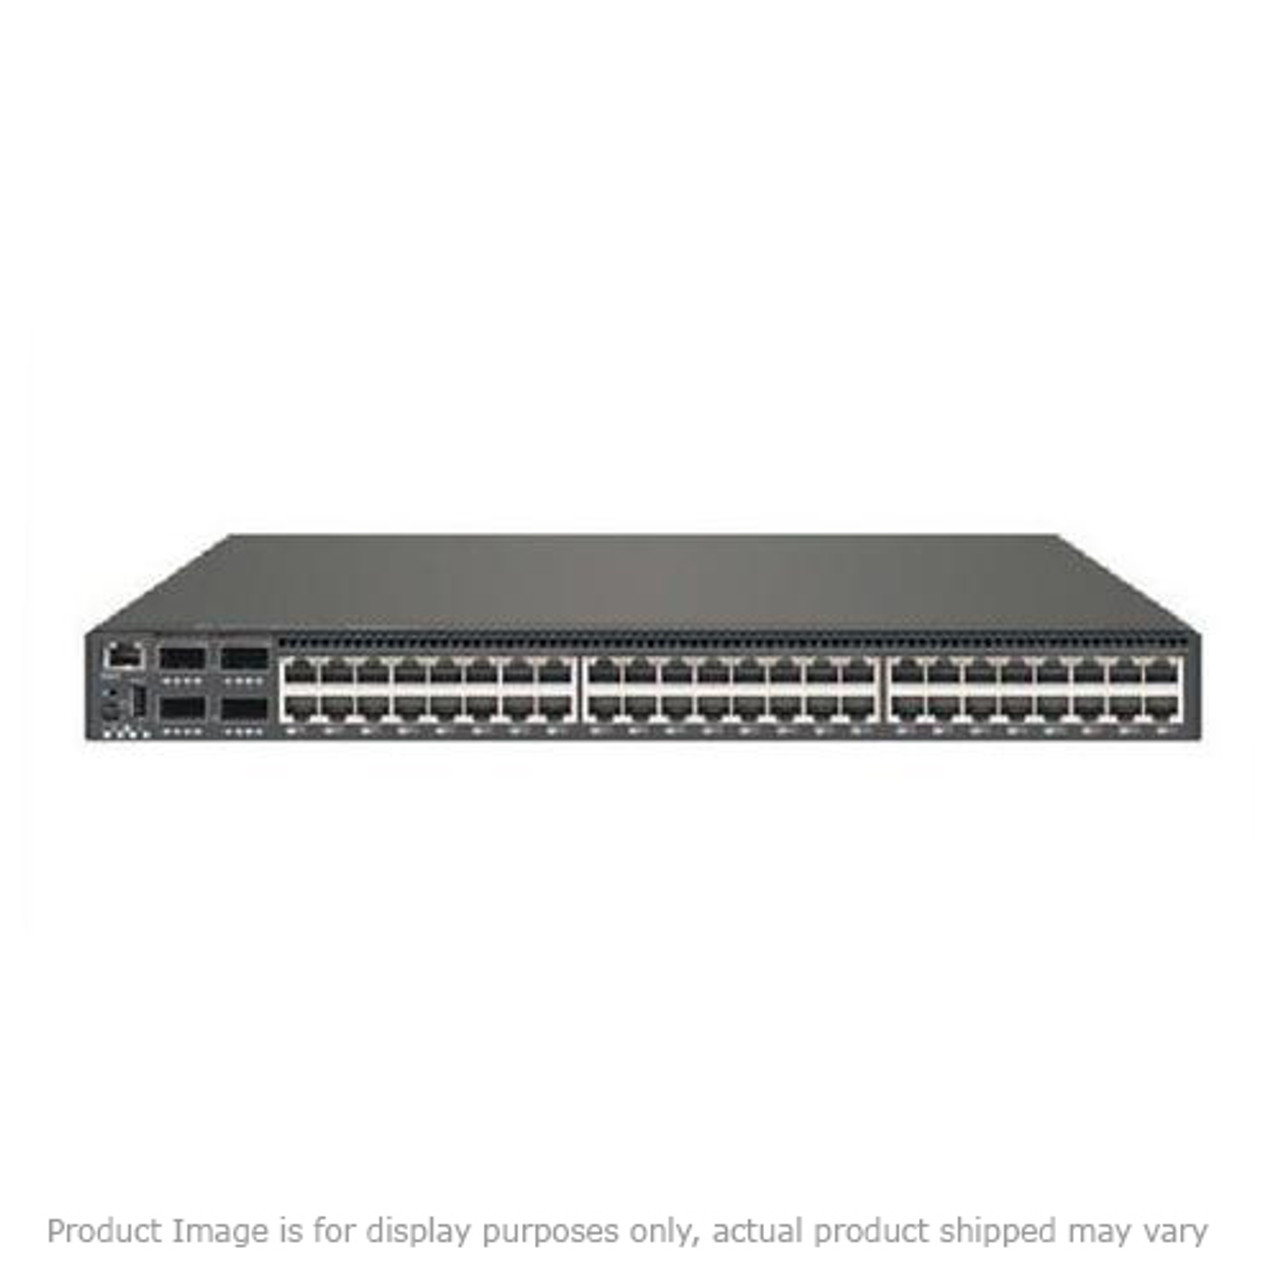 438030-B21B HP GBE2C 5-Ports 1Gbps RJ-45 Gigabit Ethernet Layer2/3 Blade Switch with 4x SFP (Empty) Ports for c-Class BladeSystem (Refurbished)